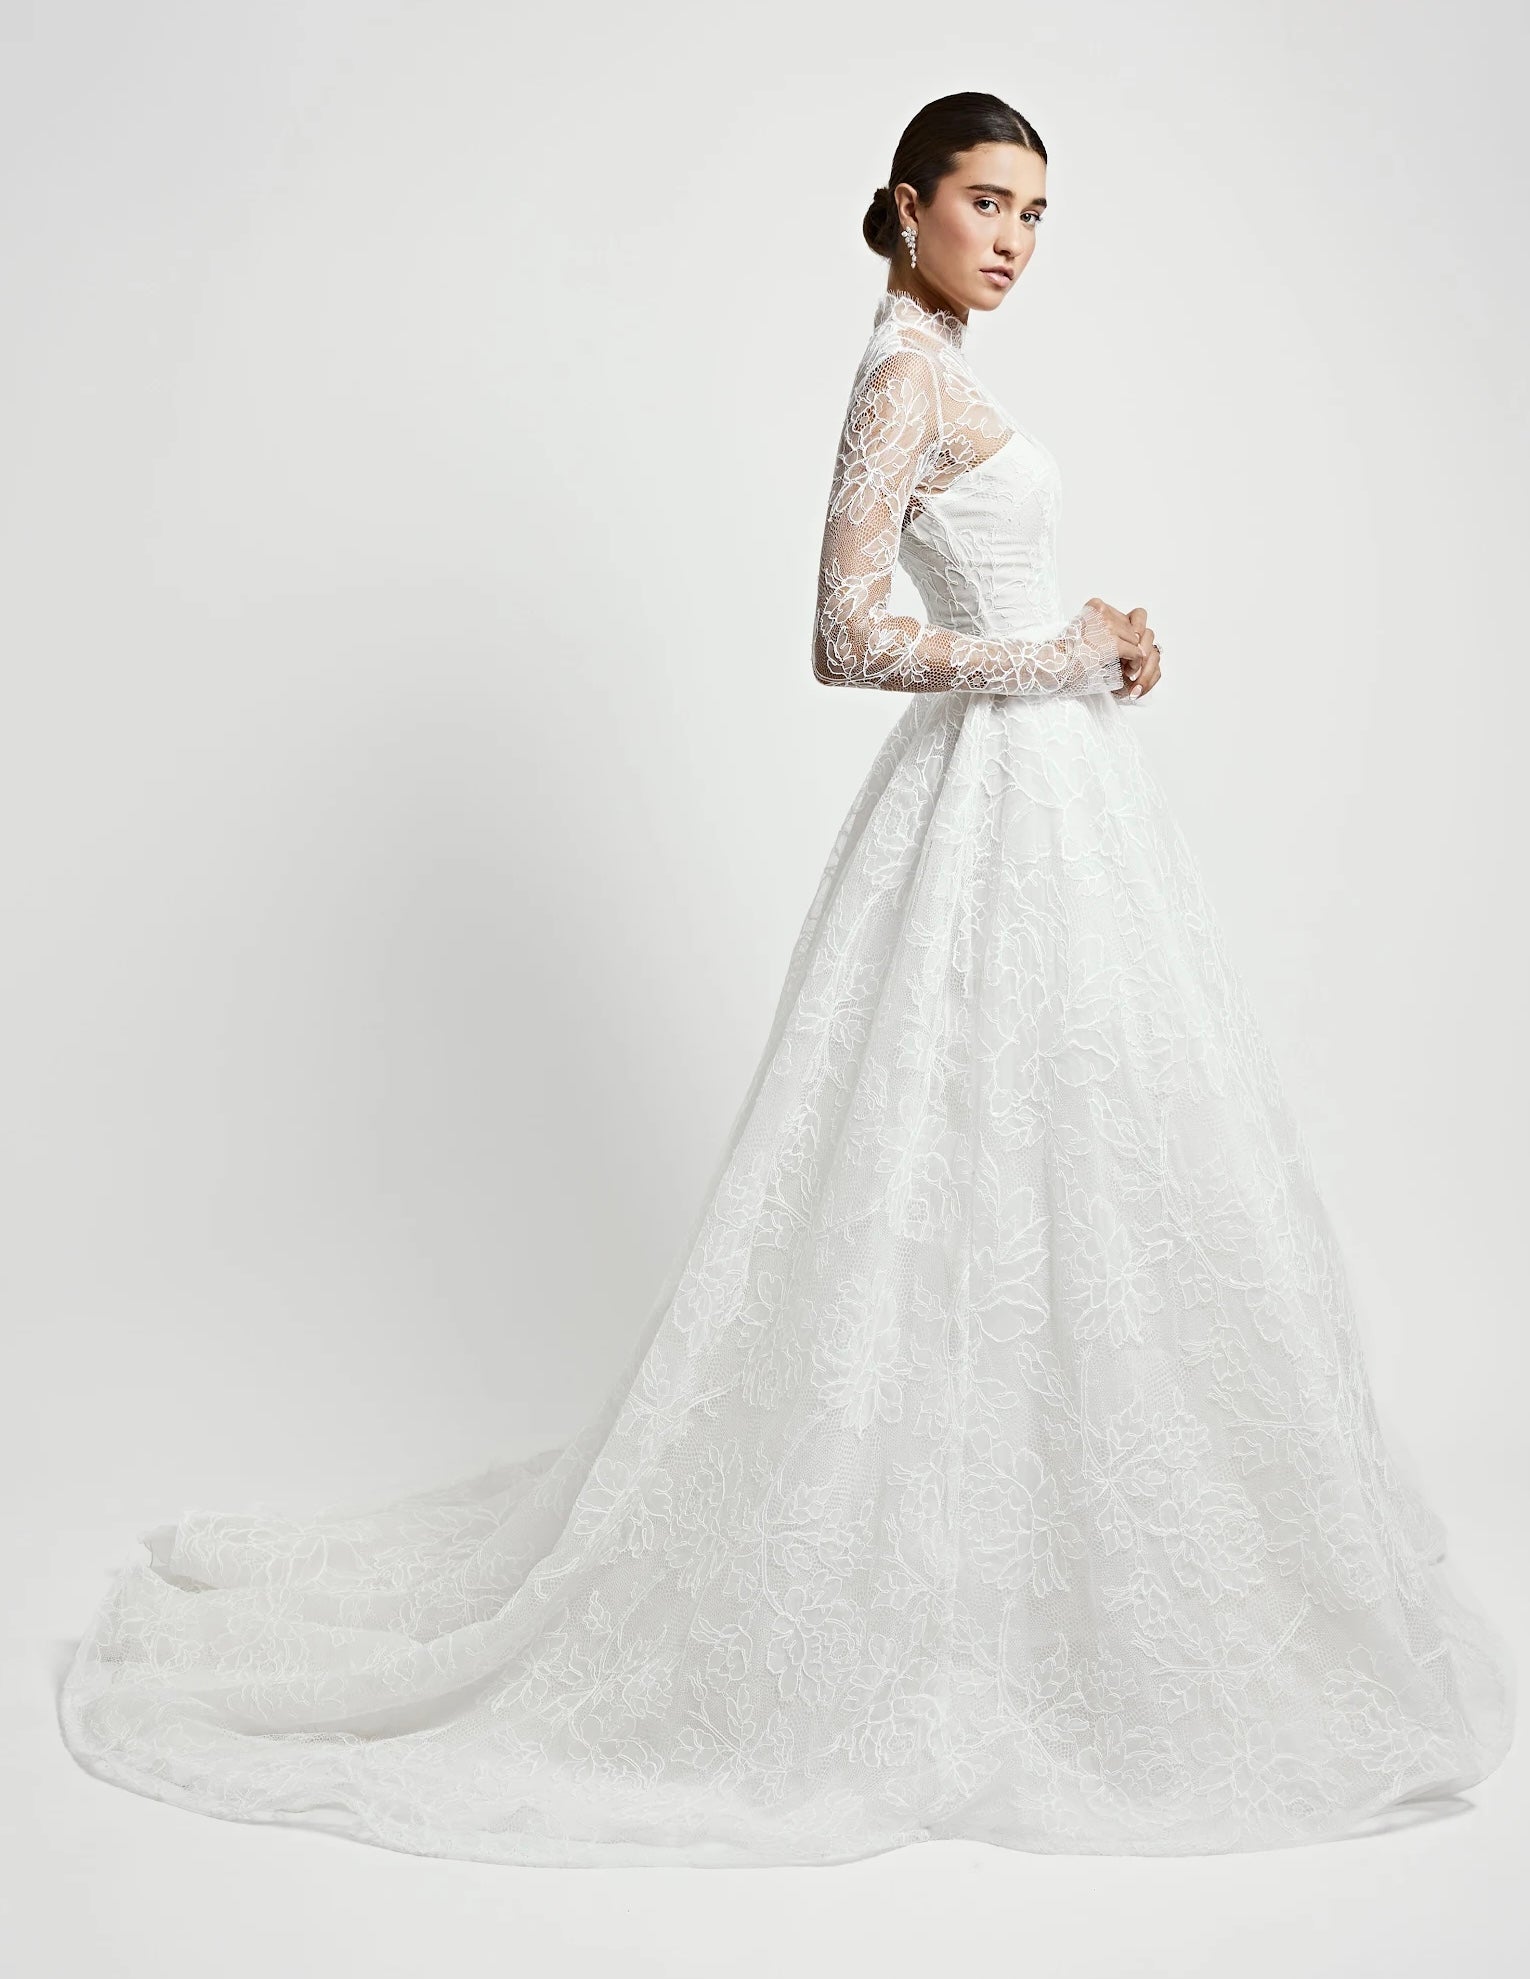 Elegant High-Neck Long Sleeve Floral Lace Ball Gown by Jaclyn Whyte - Image 2